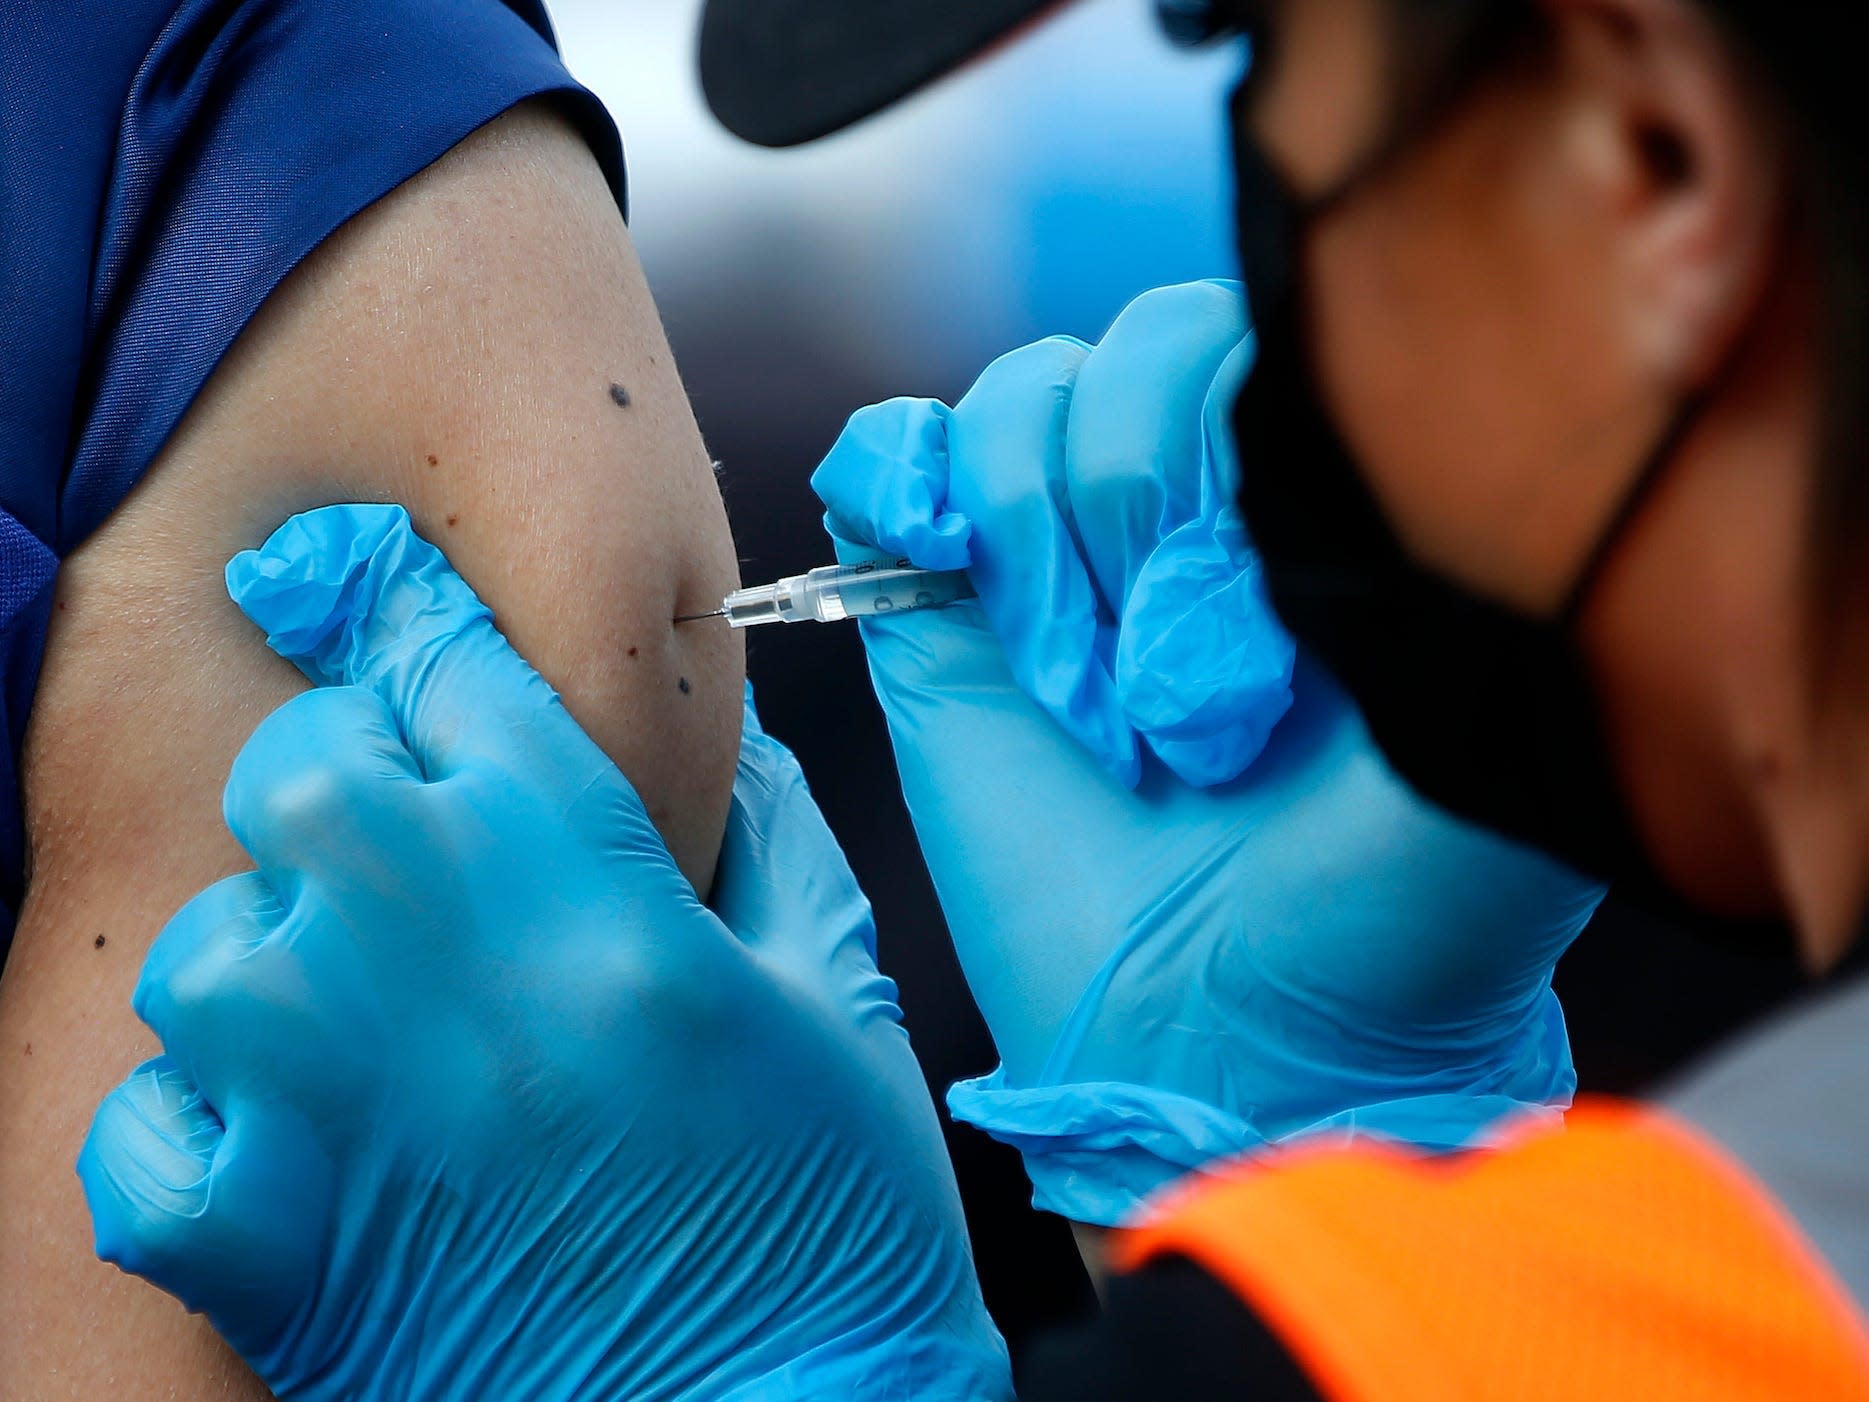 As more Americans are vaccinated, a fourth coronavirus outbreak is unlikely, says the former FDA chief